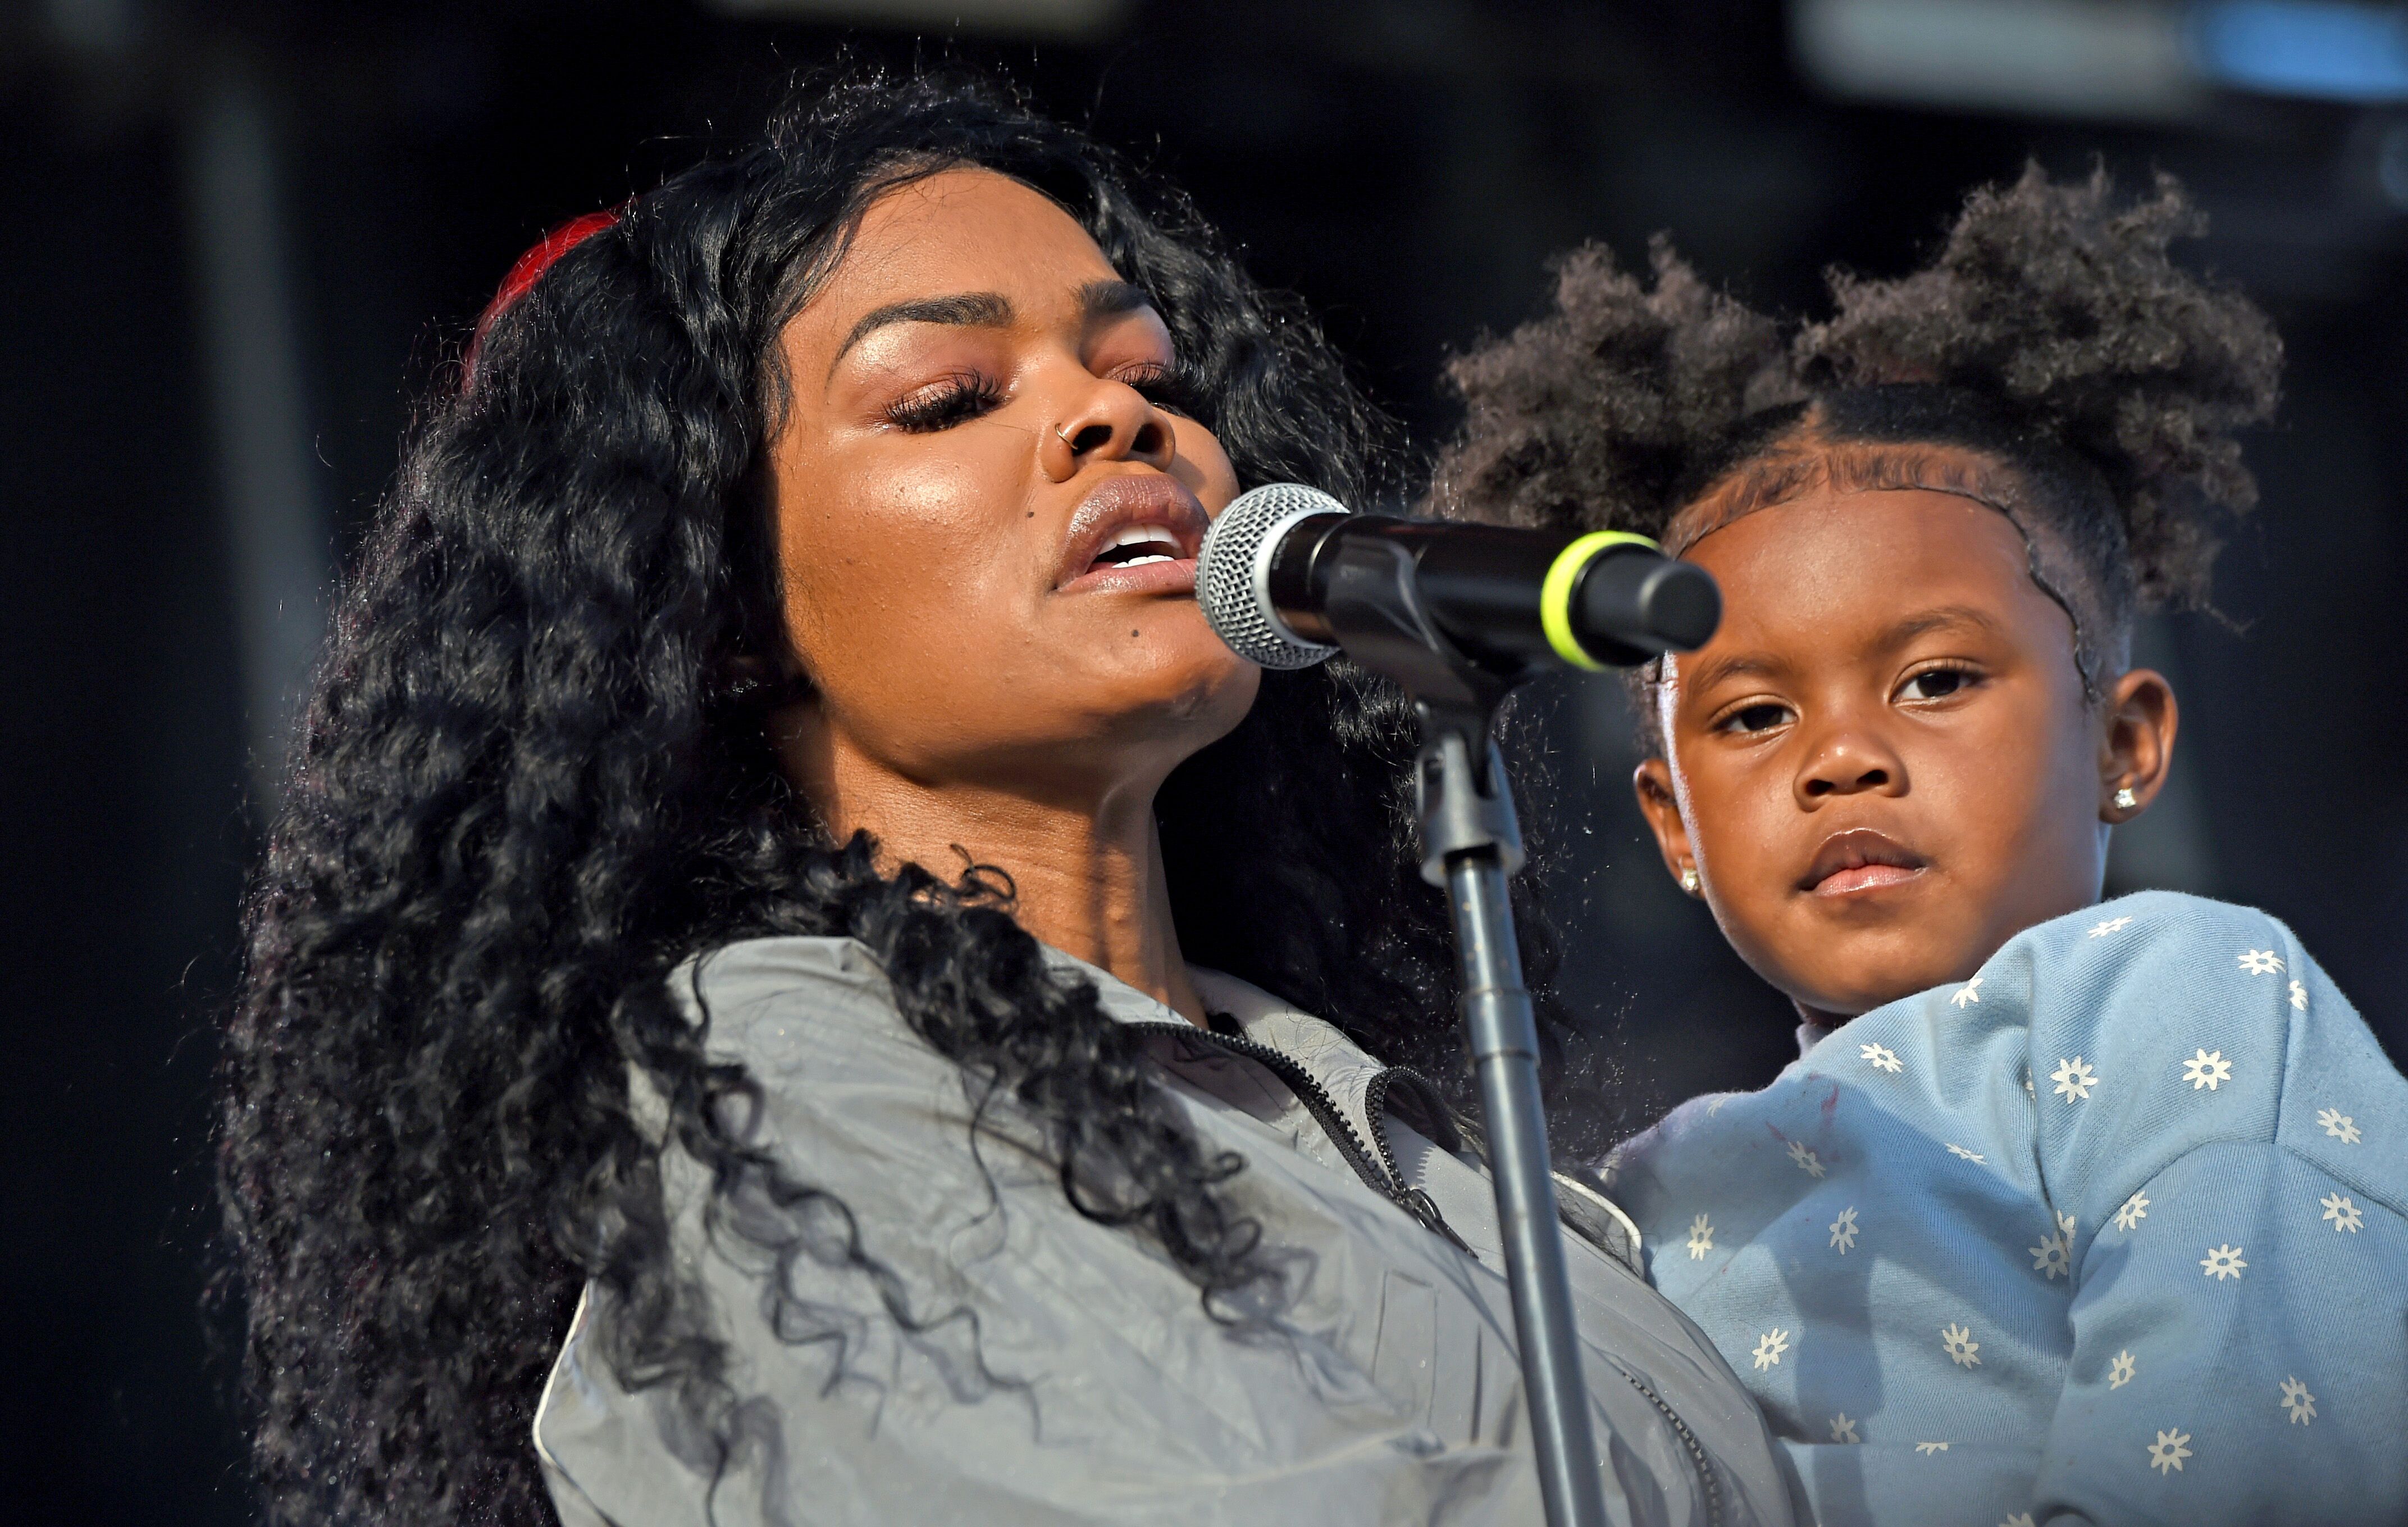 Teyana Taylor carrying her daughter Junie while performing onstage at a concert | Source: Getty Images/GlobalImagesUkraine